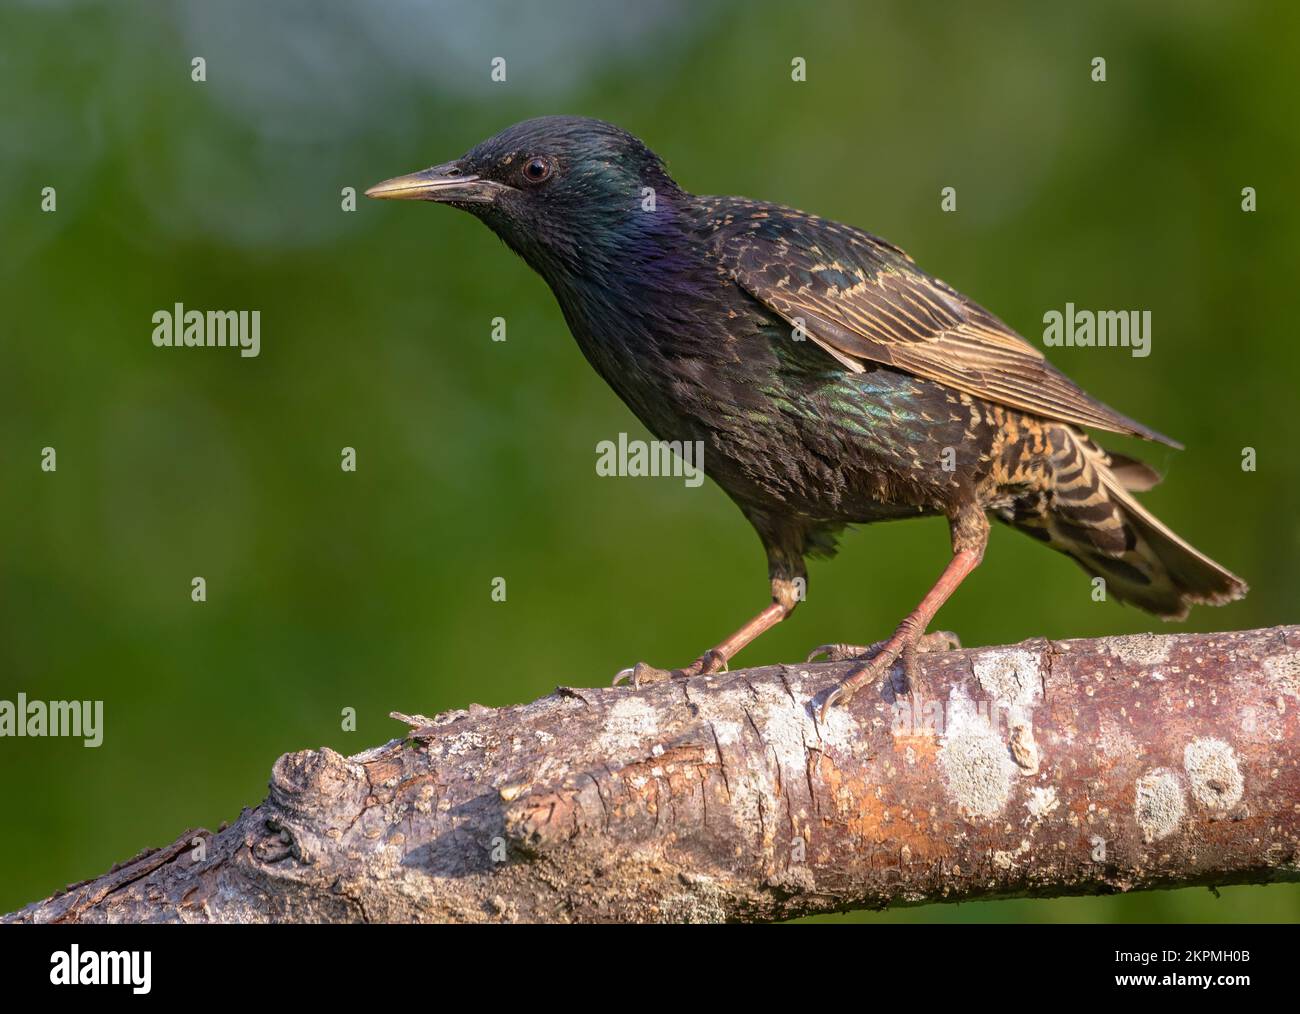 Common starling (Sturnus vulgaris) looking curiously and posing on a thick stick in mornung light Stock Photo